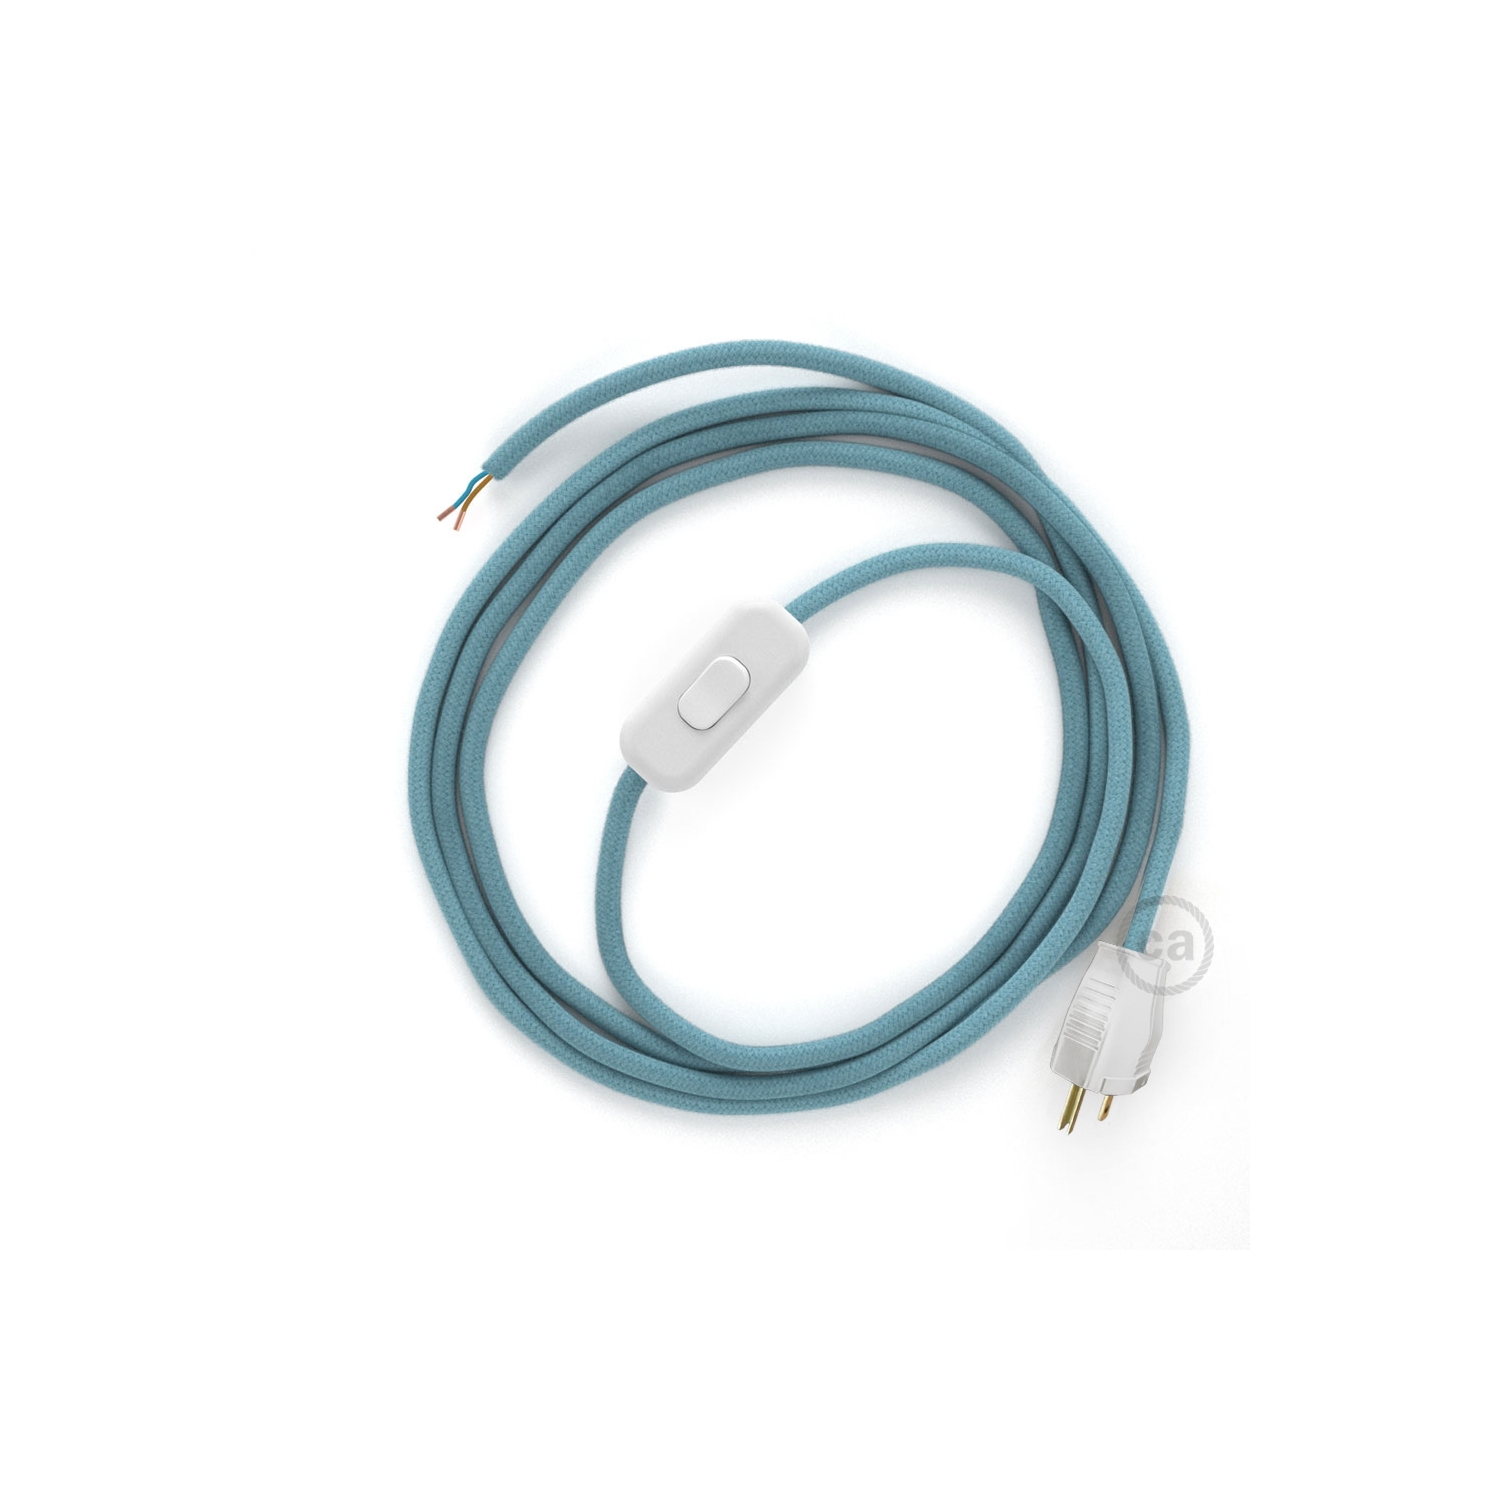 Power Cord with in-line switch, RC53 Baby Blue Cotton - Choose color of switch/plug